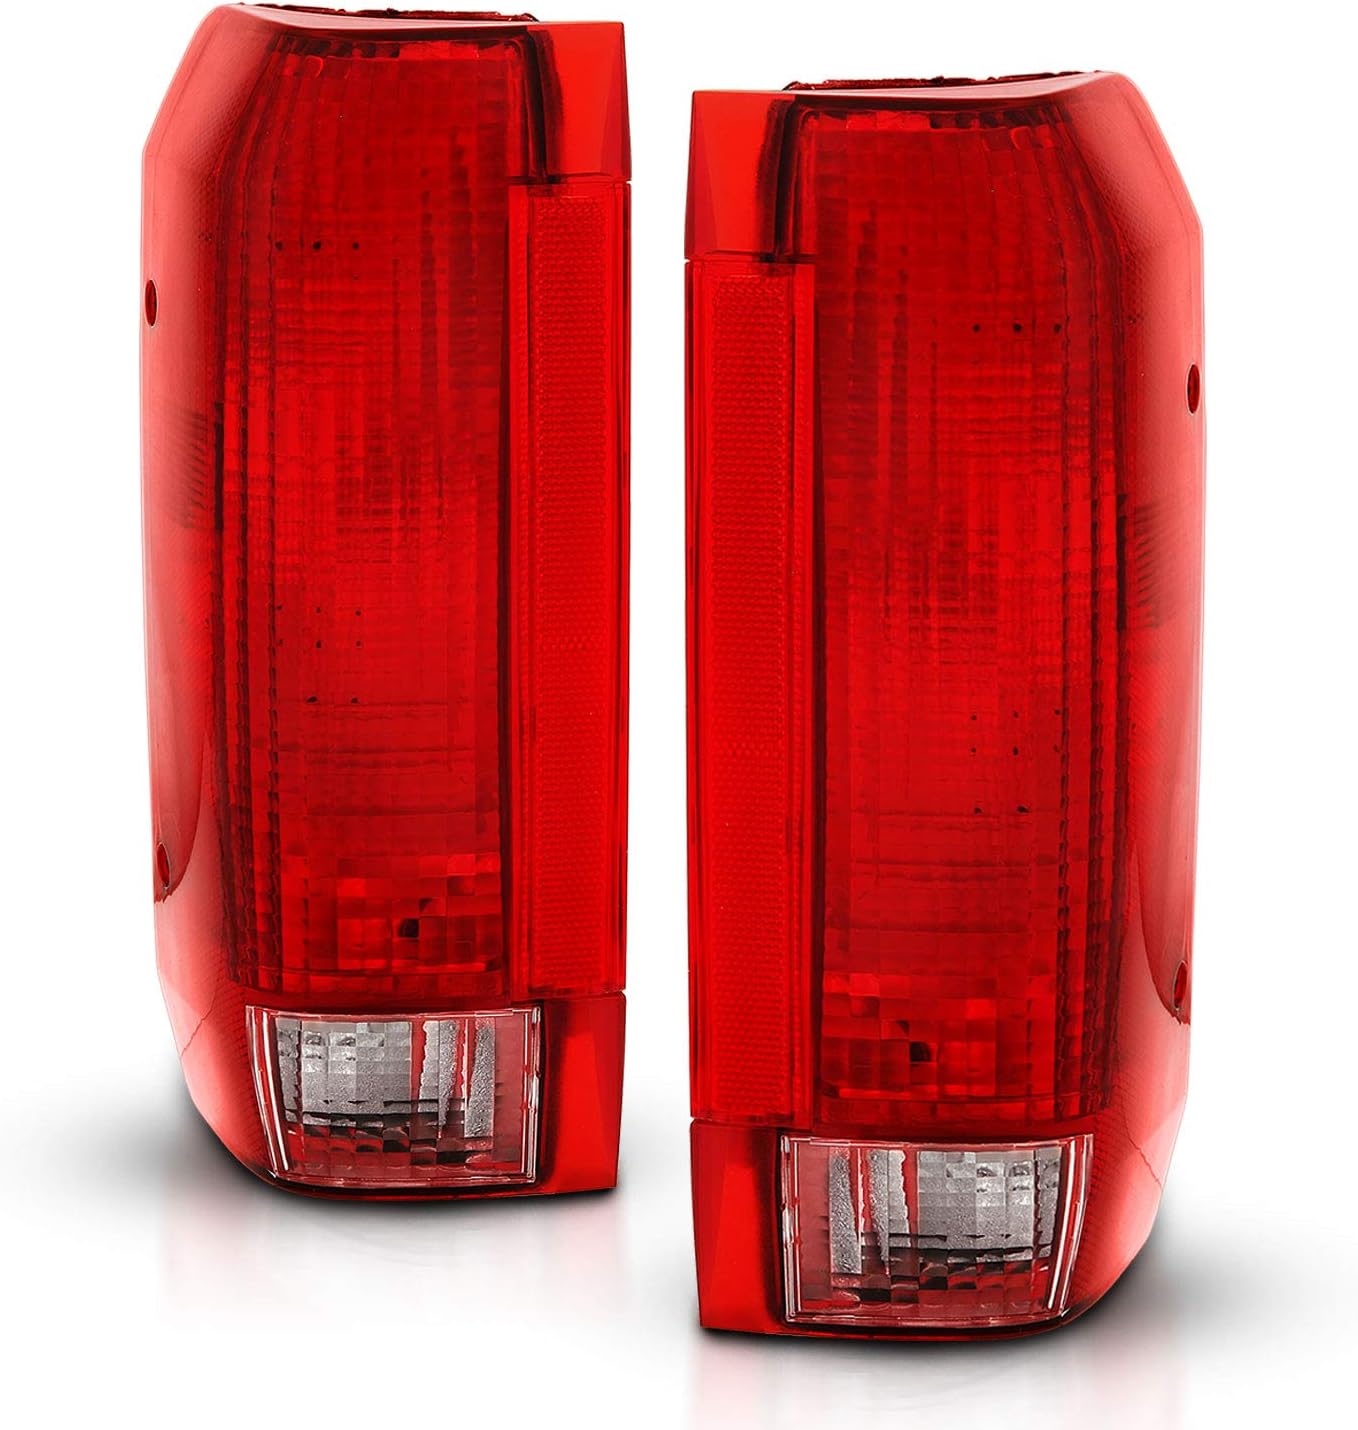 Tail Light Assembly Set for Ford Bronco / F150 F250 F350 Styleside Pickup